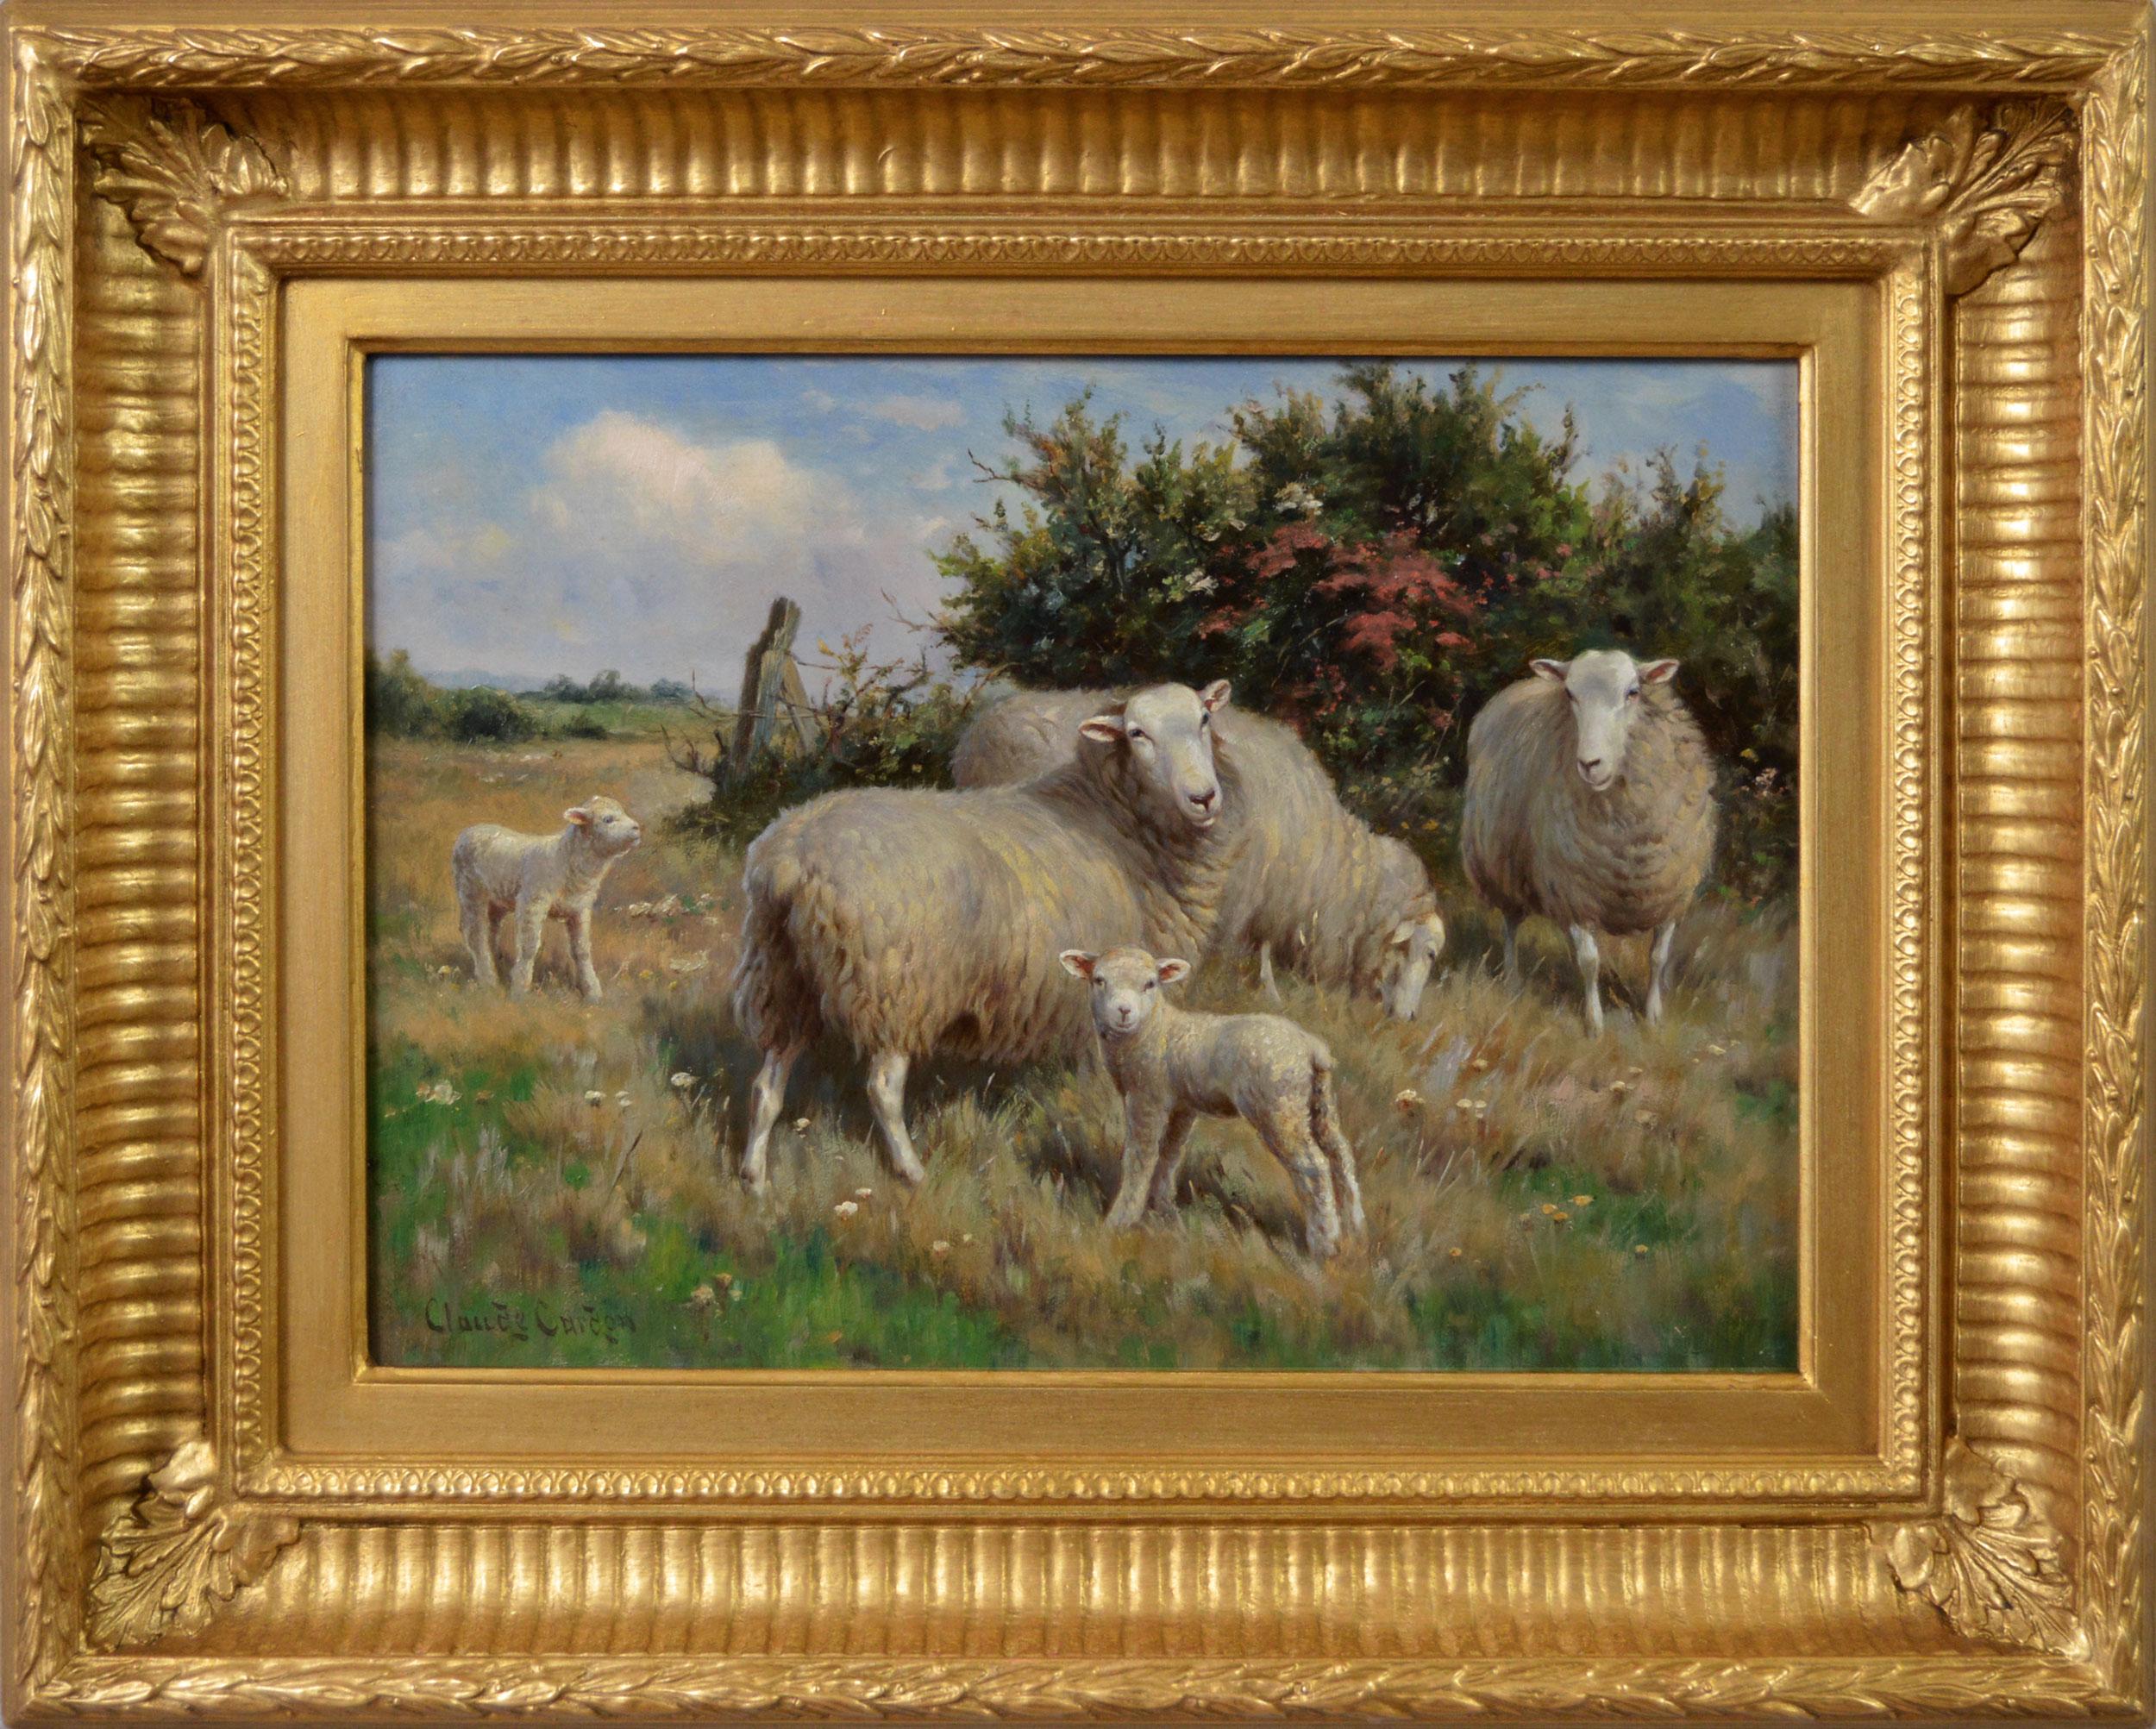 Claude Cardon Landscape Painting - 19th Century landscape animal oil painting of sheep with lambs